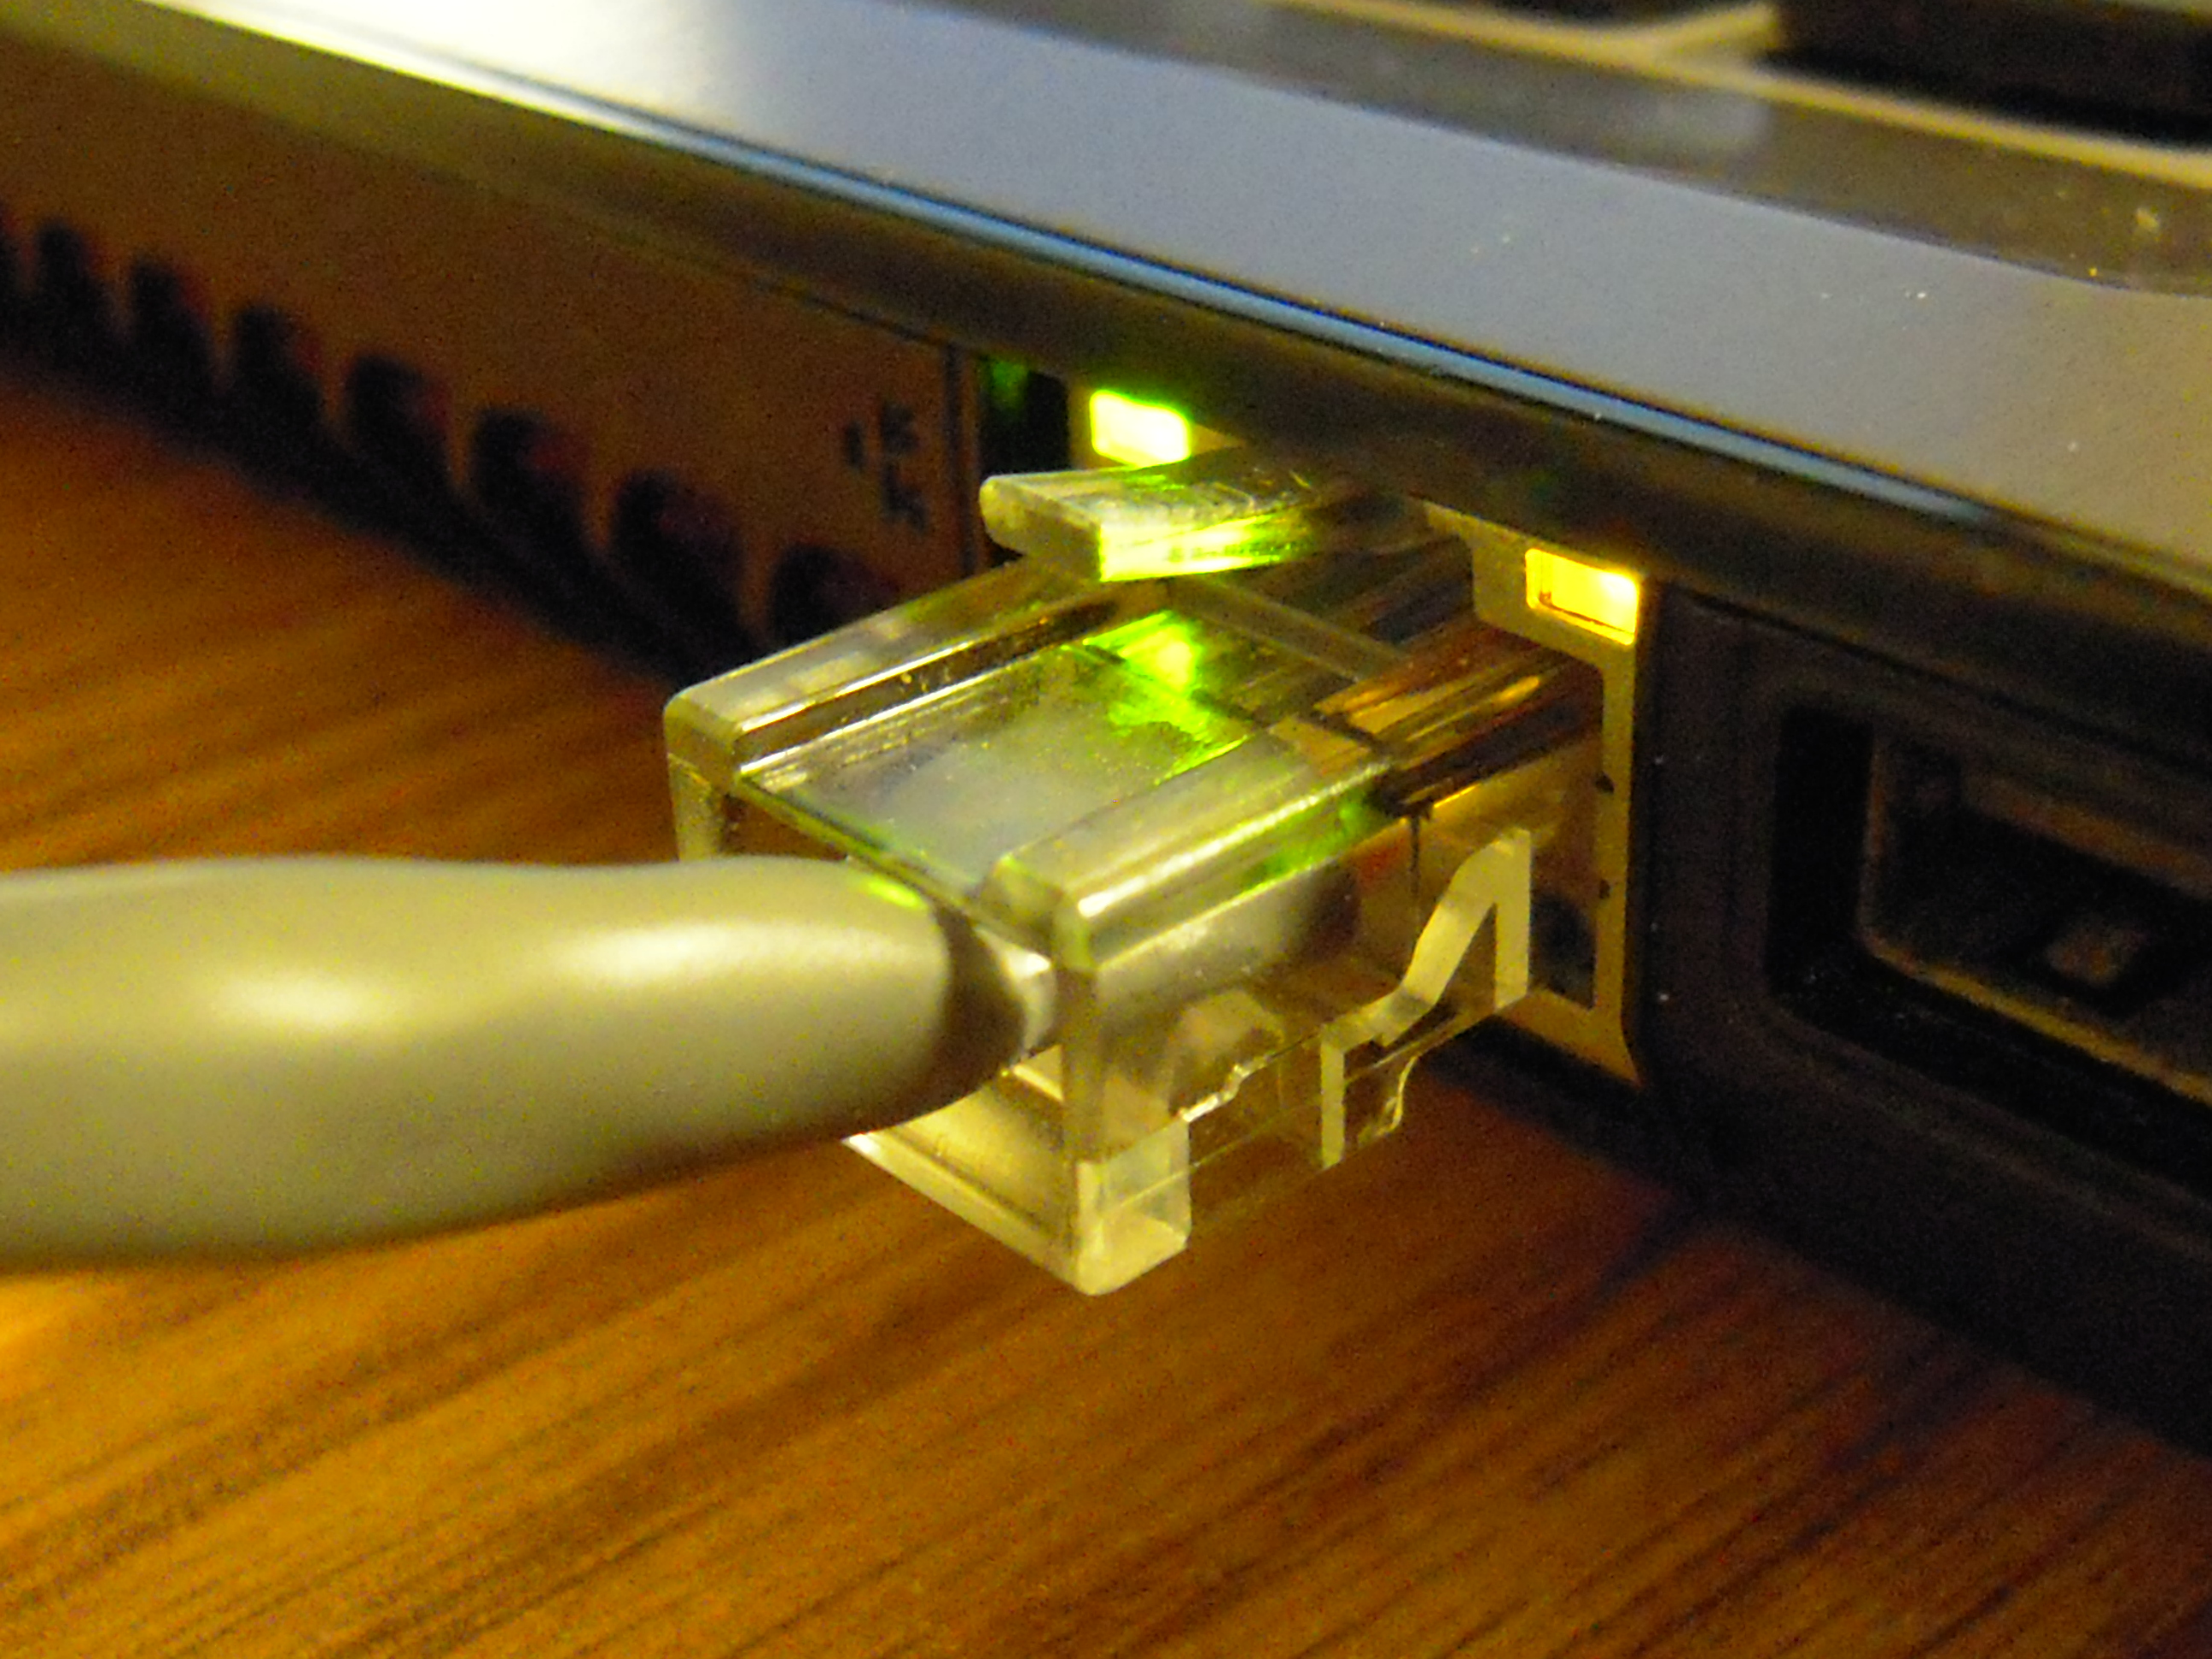 Network cable connected to a computer